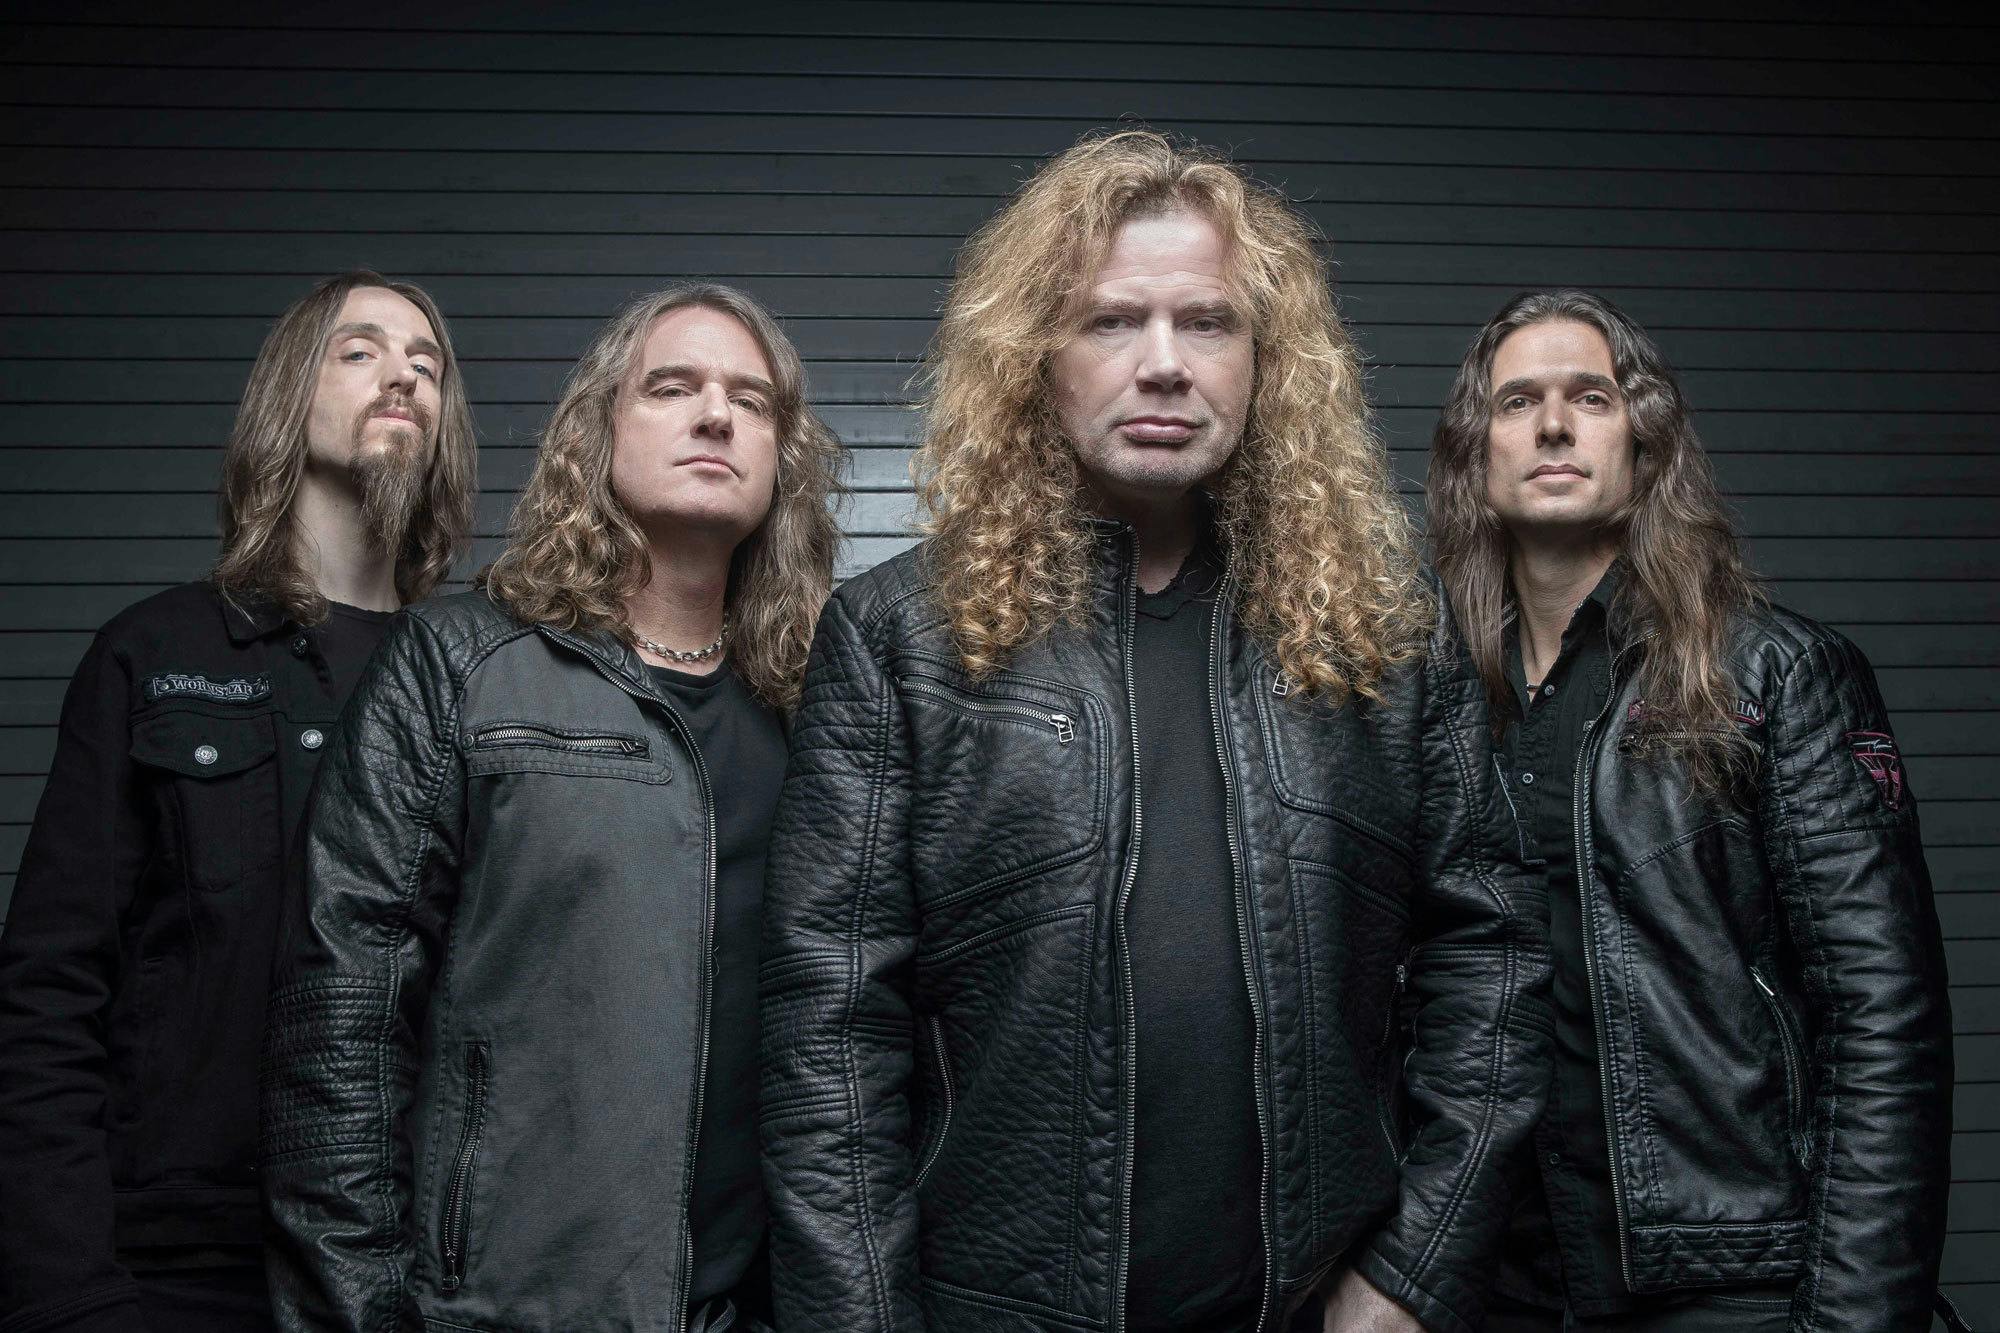 Dave Mustaine's Daughter Joins Megadeth Onstage